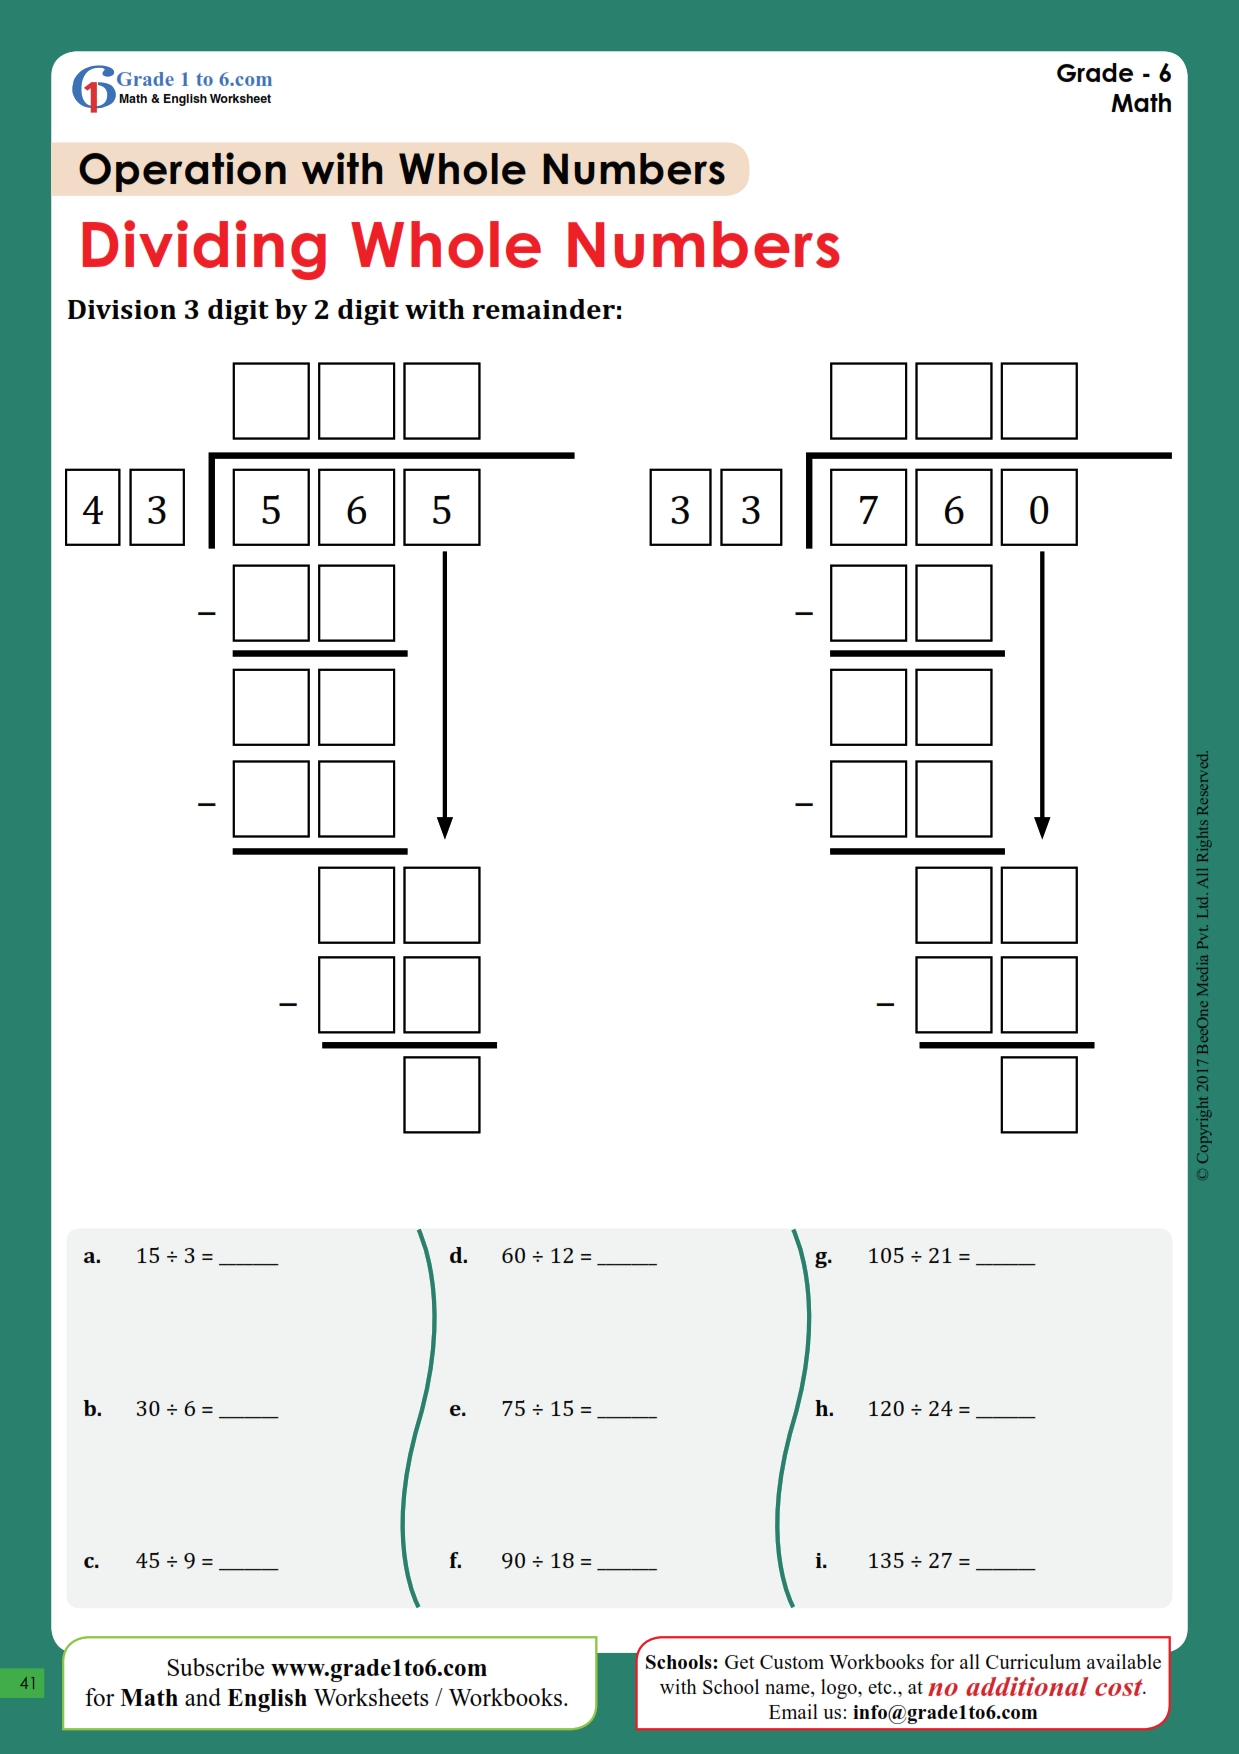 Worksheet On Division Of Whole Numbers